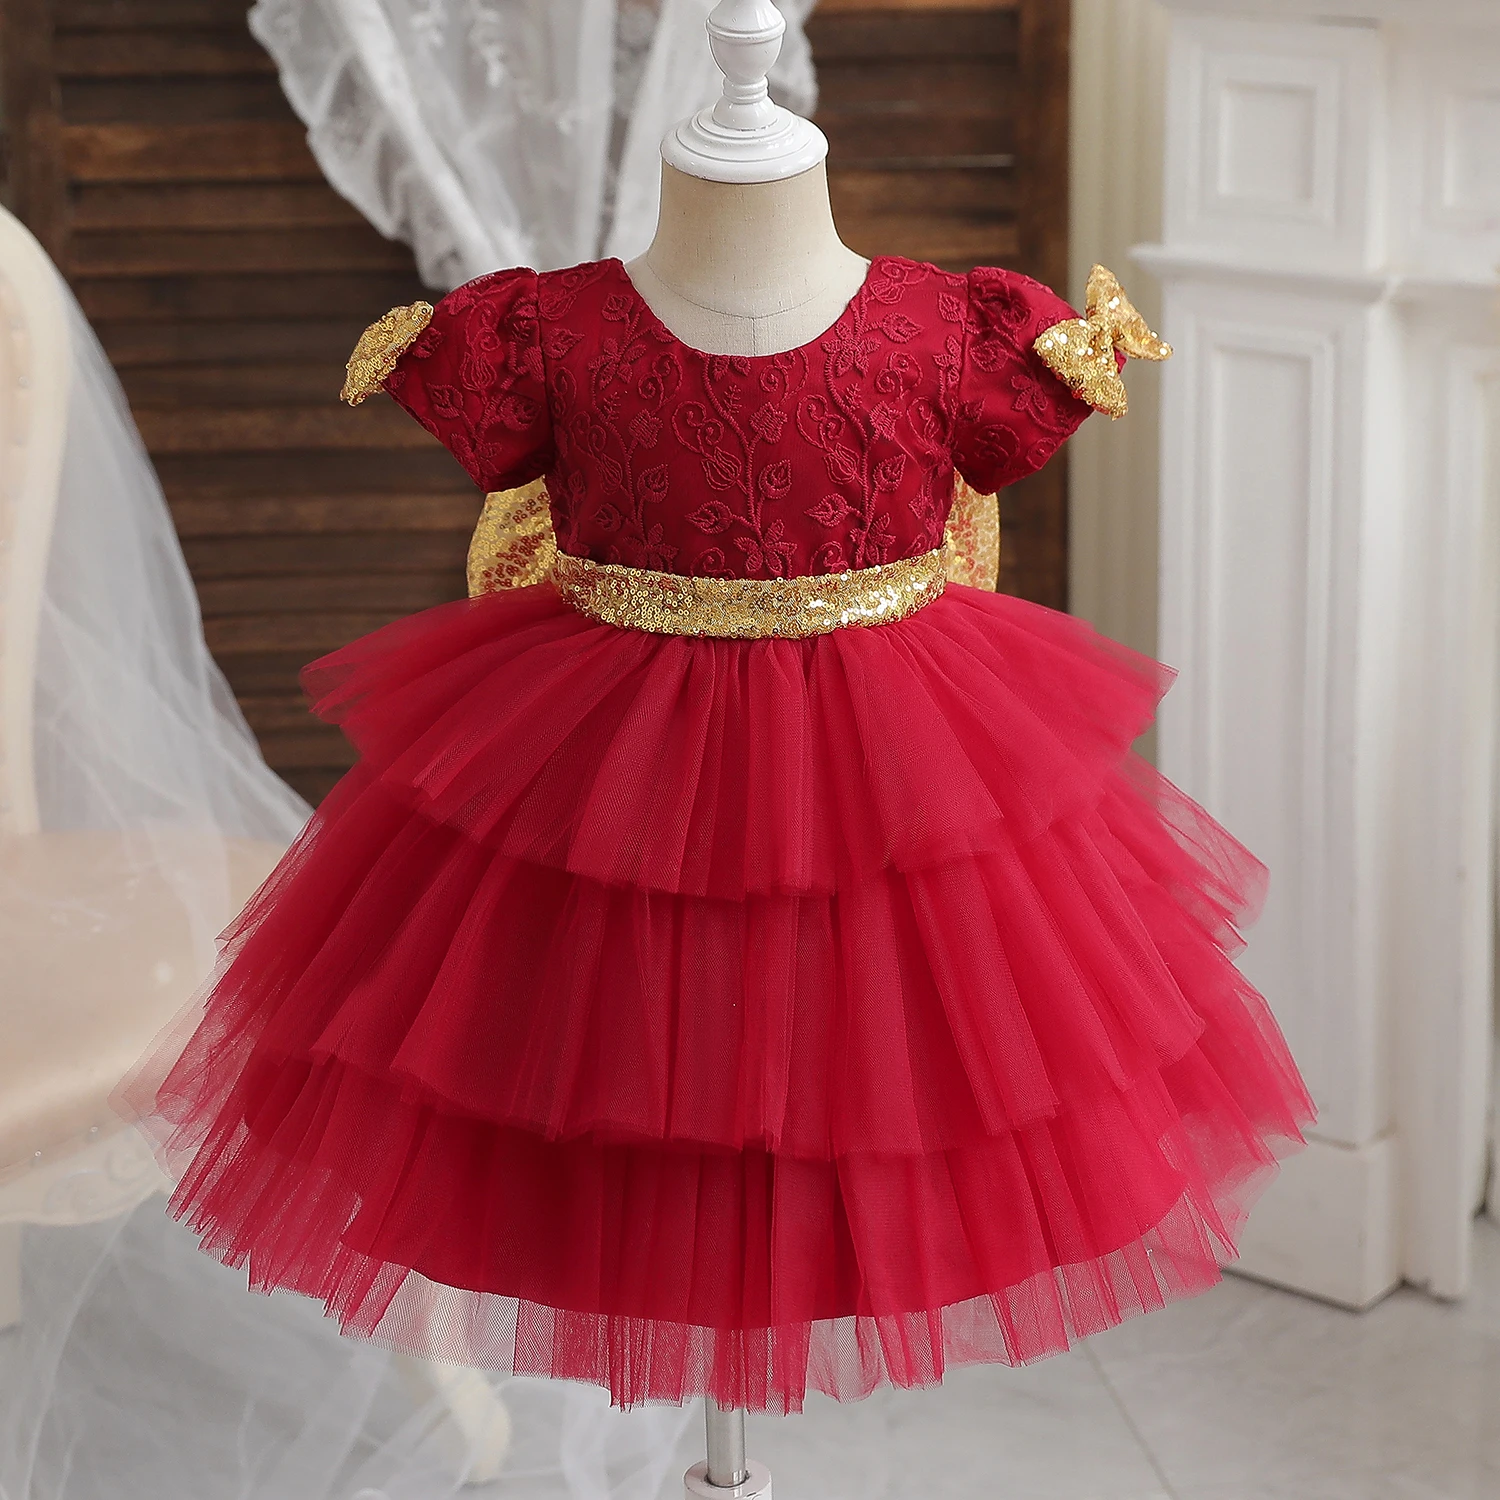 

Baby Girl 1st Birthday Party Dresses Red Embroidery Sequined Big Bow Layered Tulle Tutu Gown Infant Formal Pageant Prom Costume